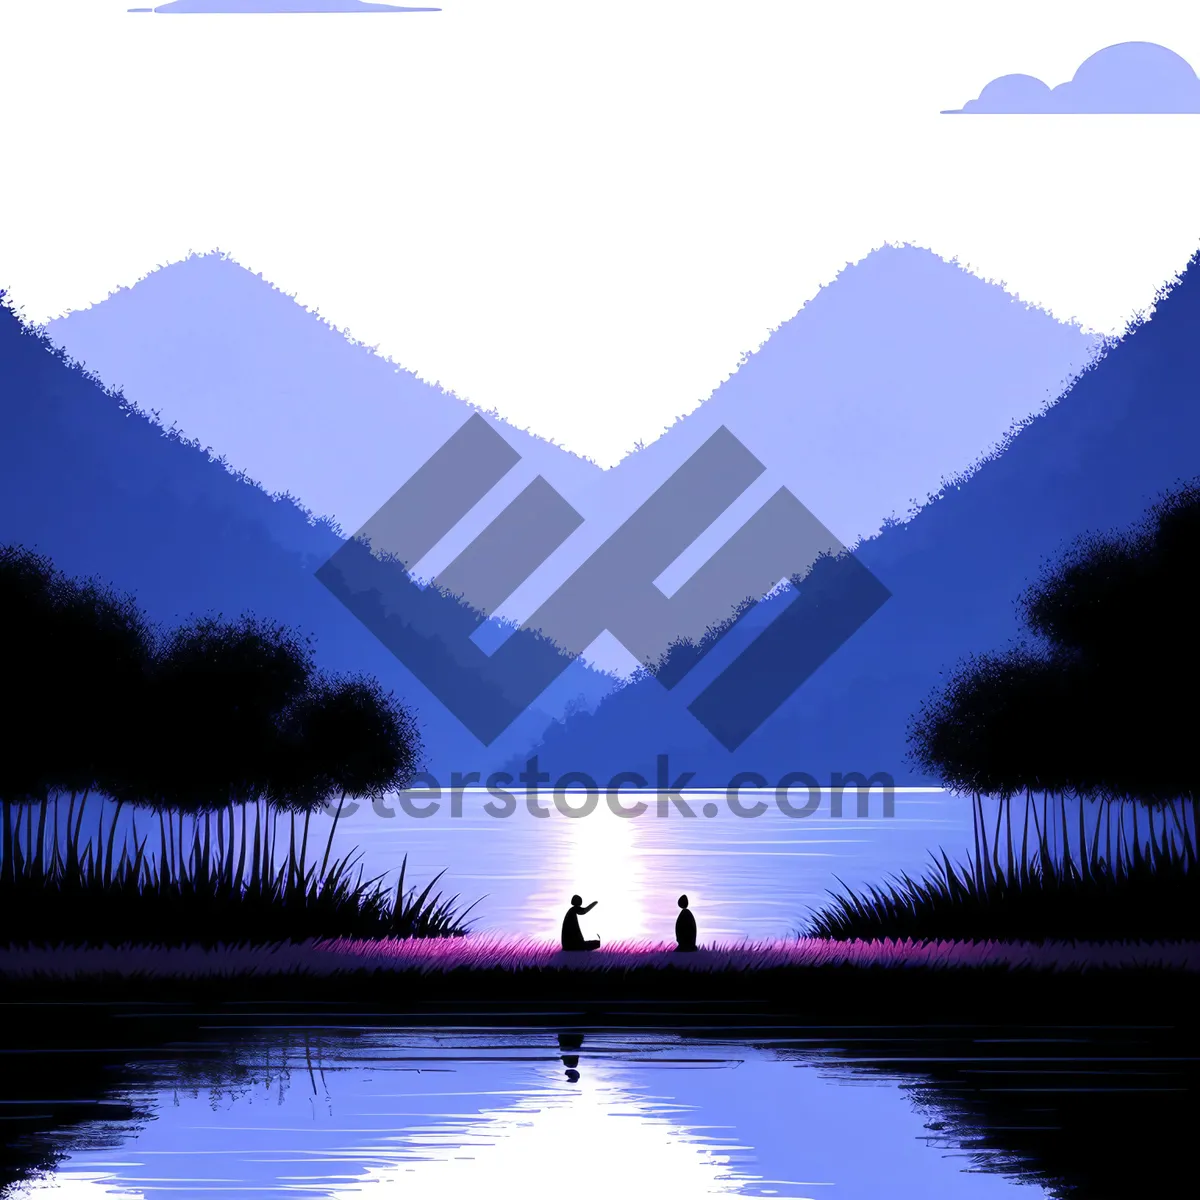 Picture of Serene Lakeside Scenery with Mountain Reflection